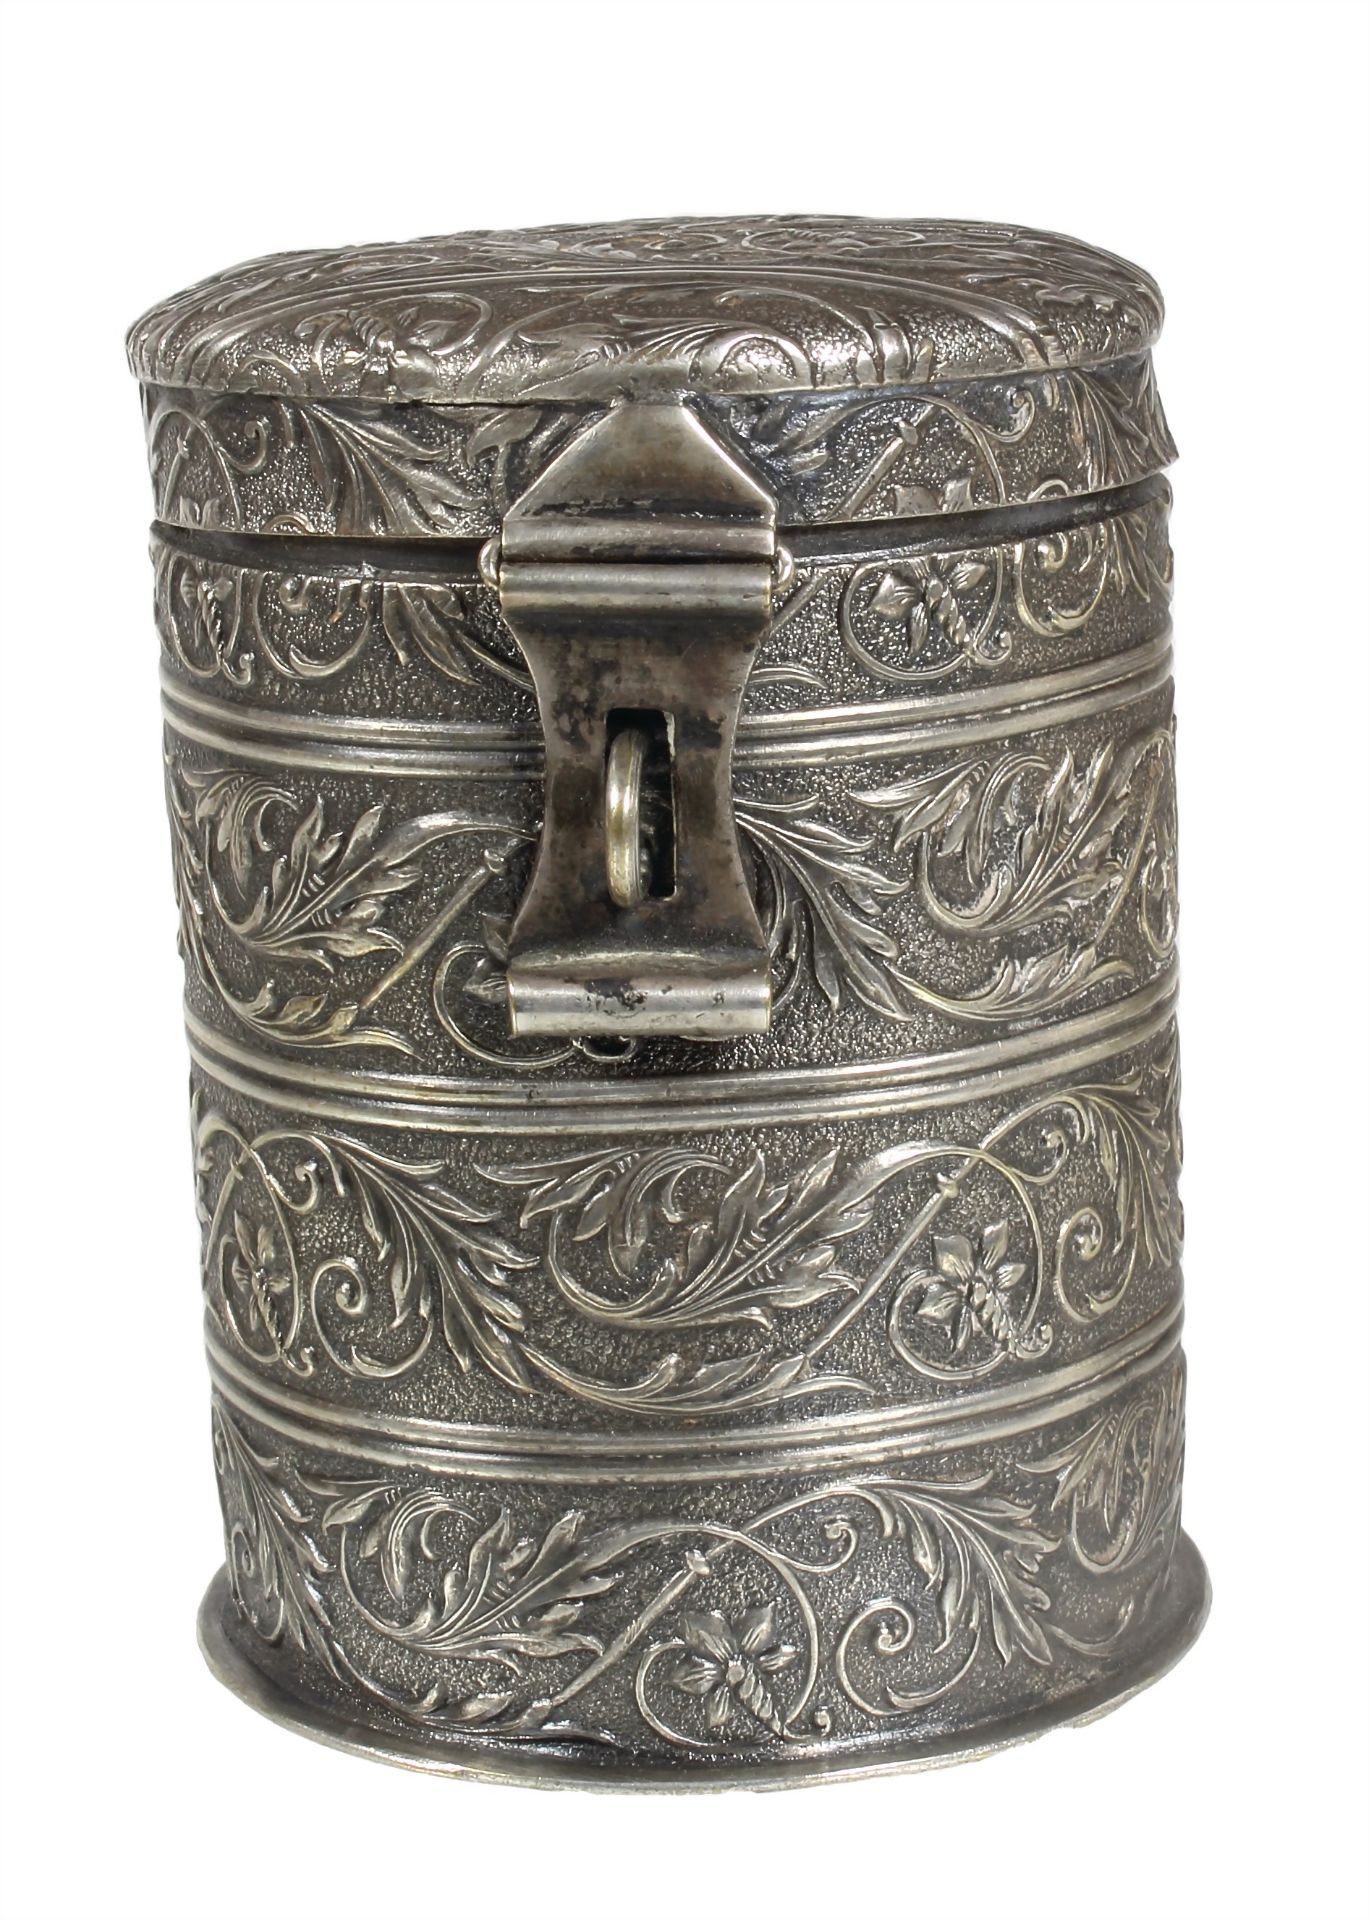 money box with handles around 1900, silver (tested), all round floral ornament, diameter  = ... - Image 3 of 3